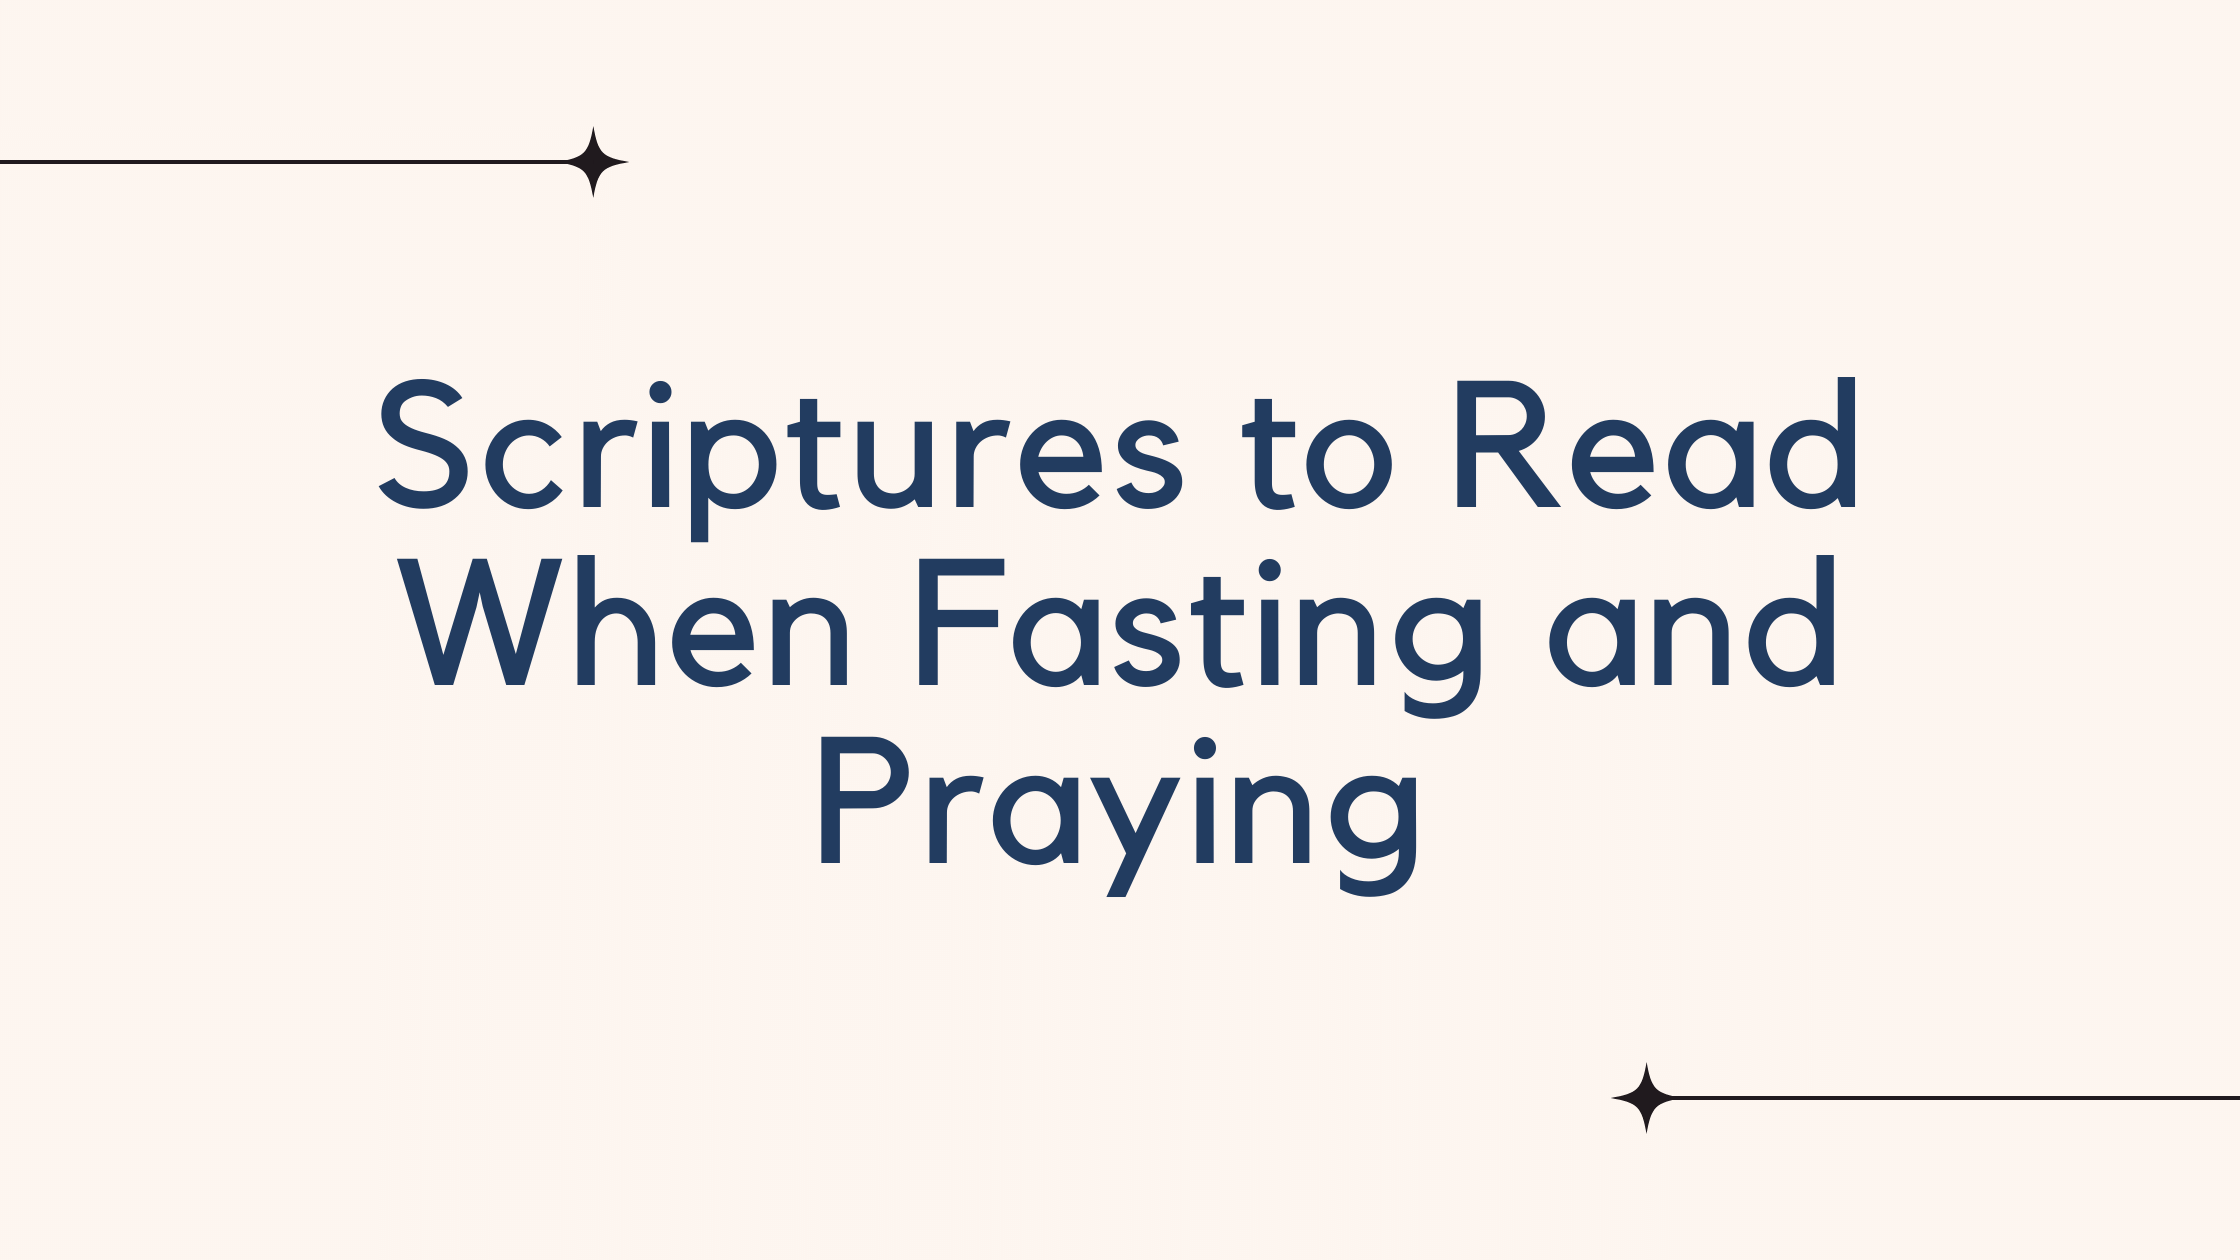 Scriptures to Read When Fasting and Praying